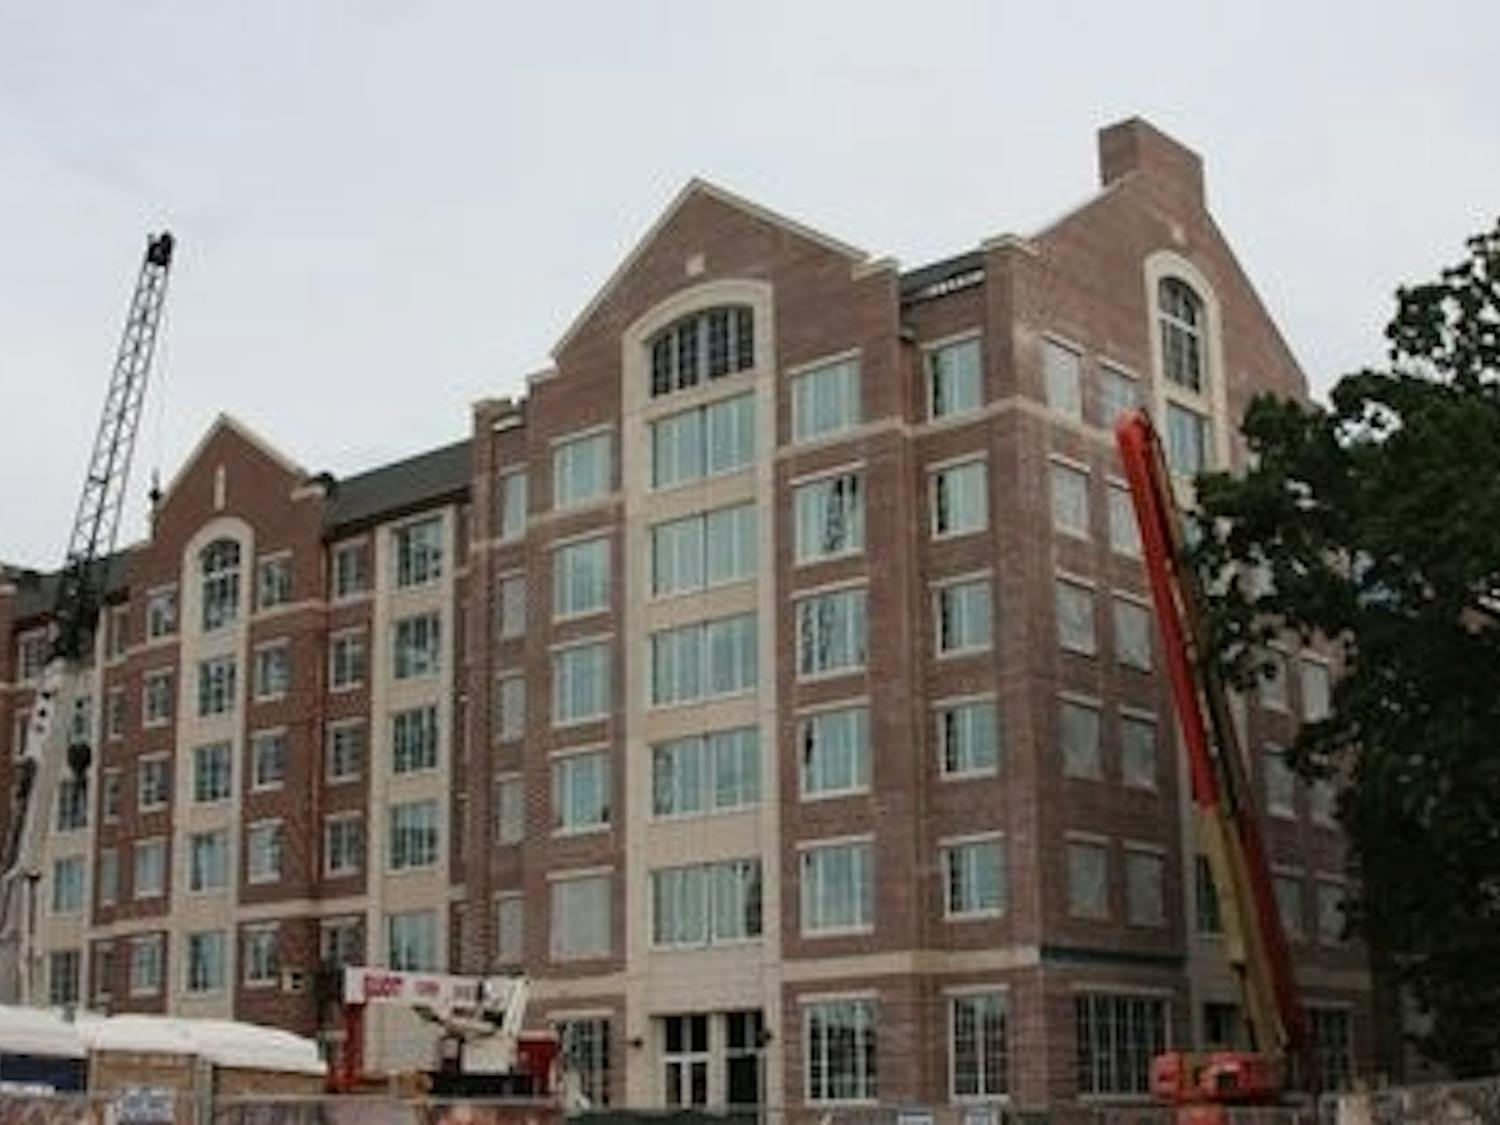 'Upscale' South Donahue dorms near completion in time for fall semester